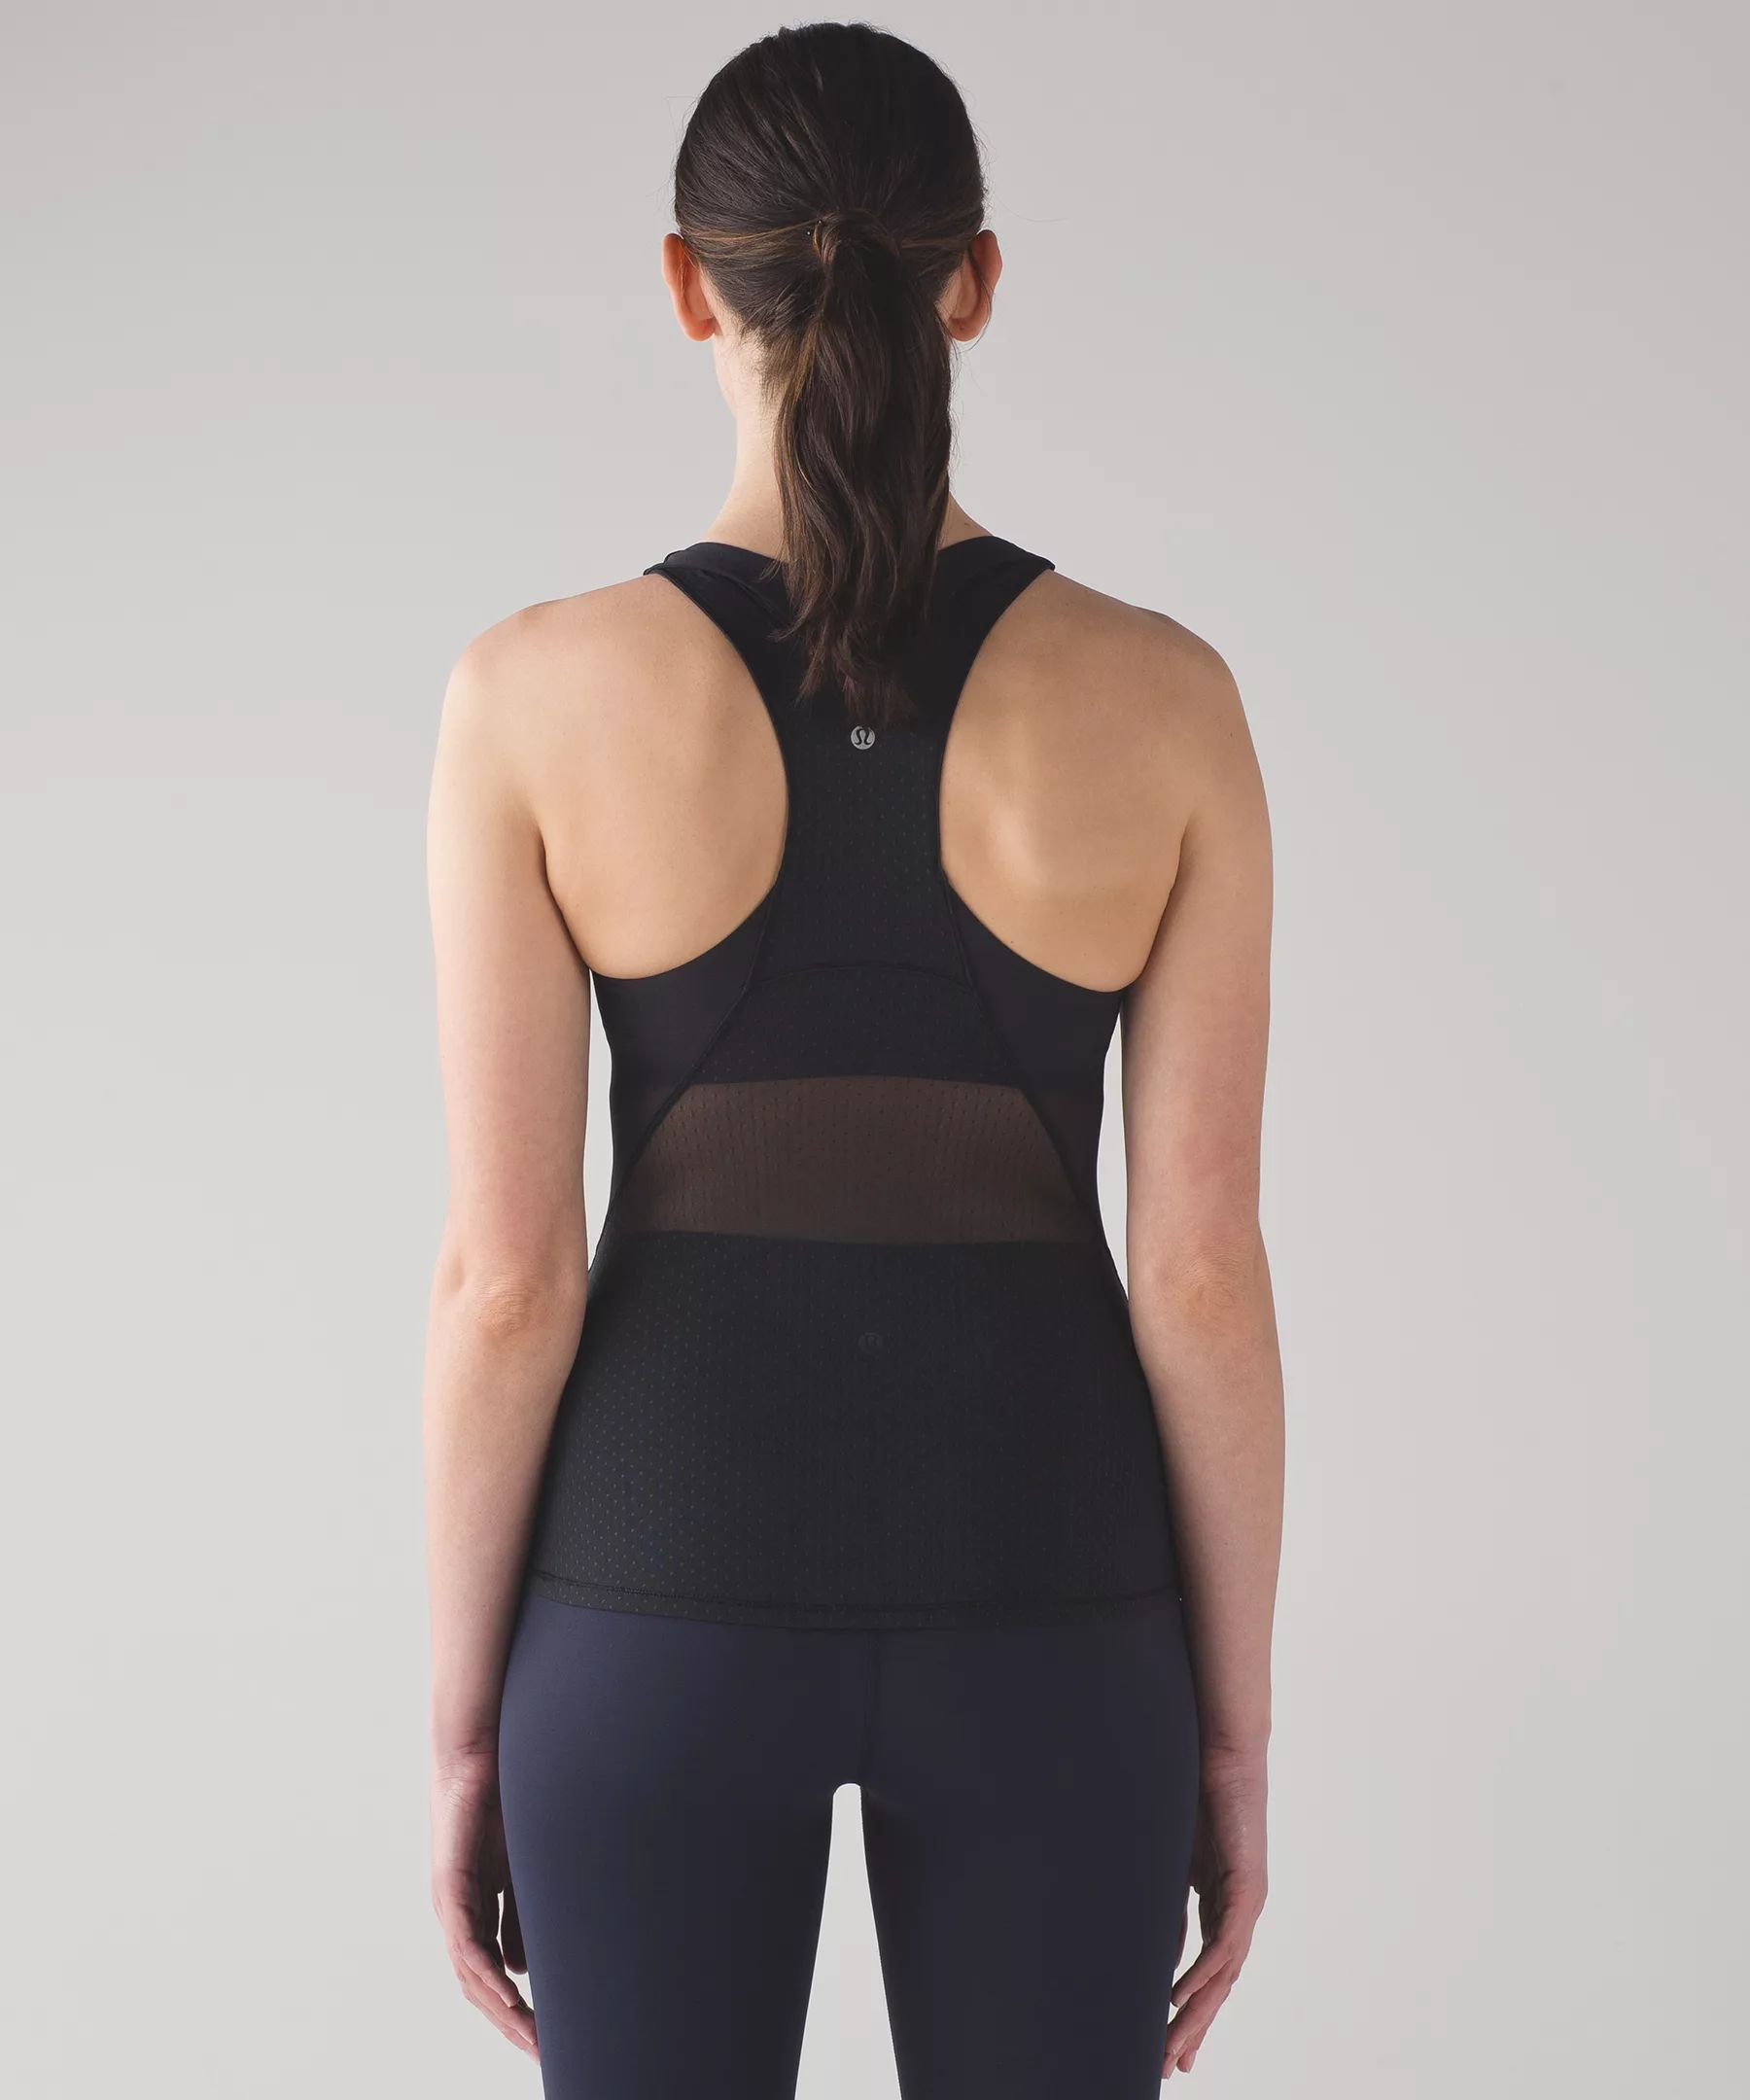 Body Con Tank *Light Support for B/C cup | Lululemon (US)